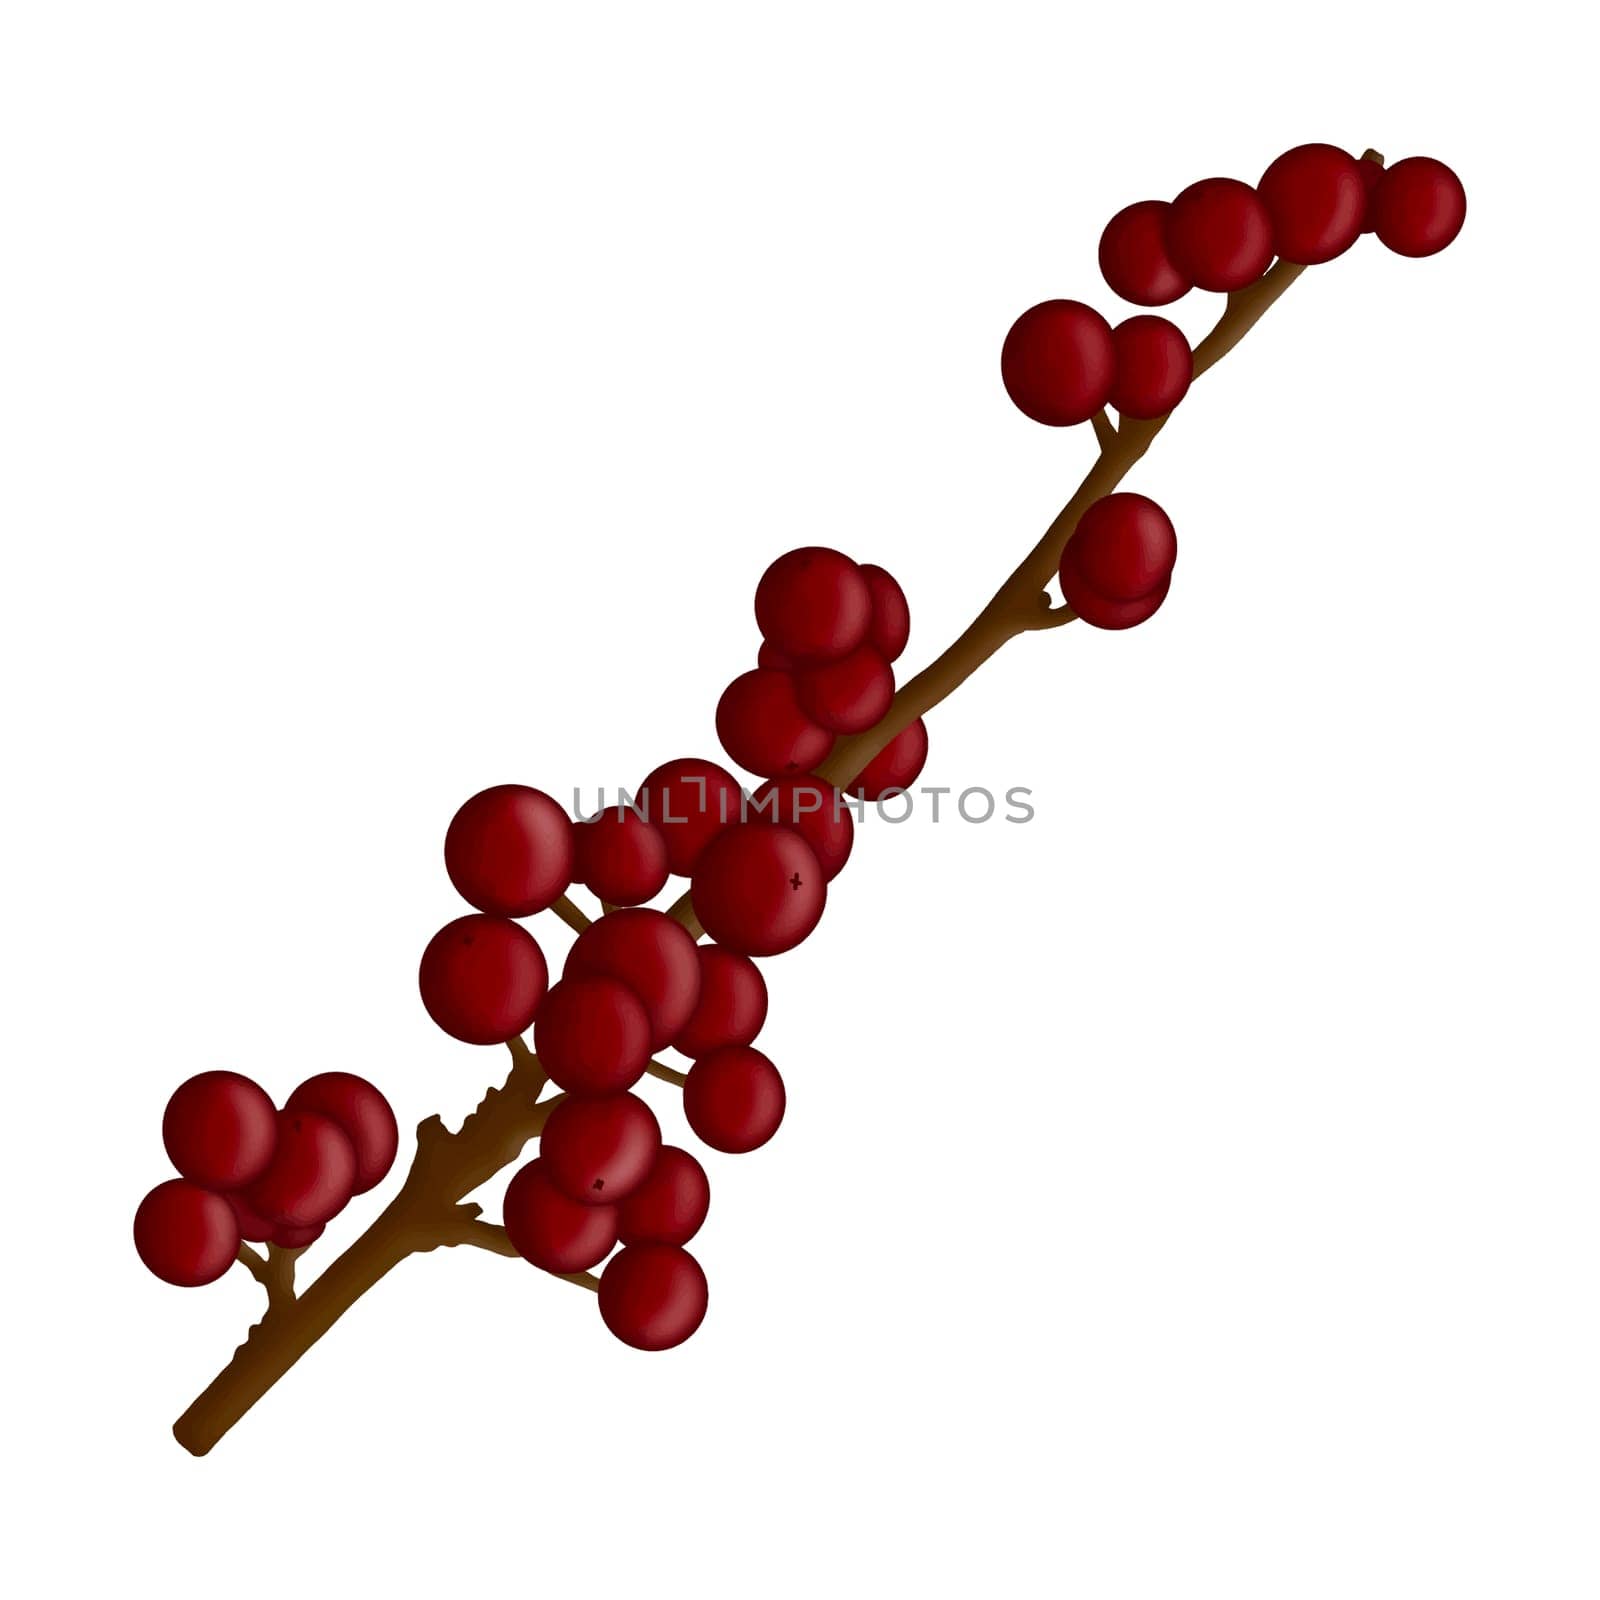 Winterberries branch christmas floral element isolated on white background. Botanical illustration for Xmas design. Party Clipart for celebration design, planner sticker, pattern, background, invitations, greeting cards, sublimation.